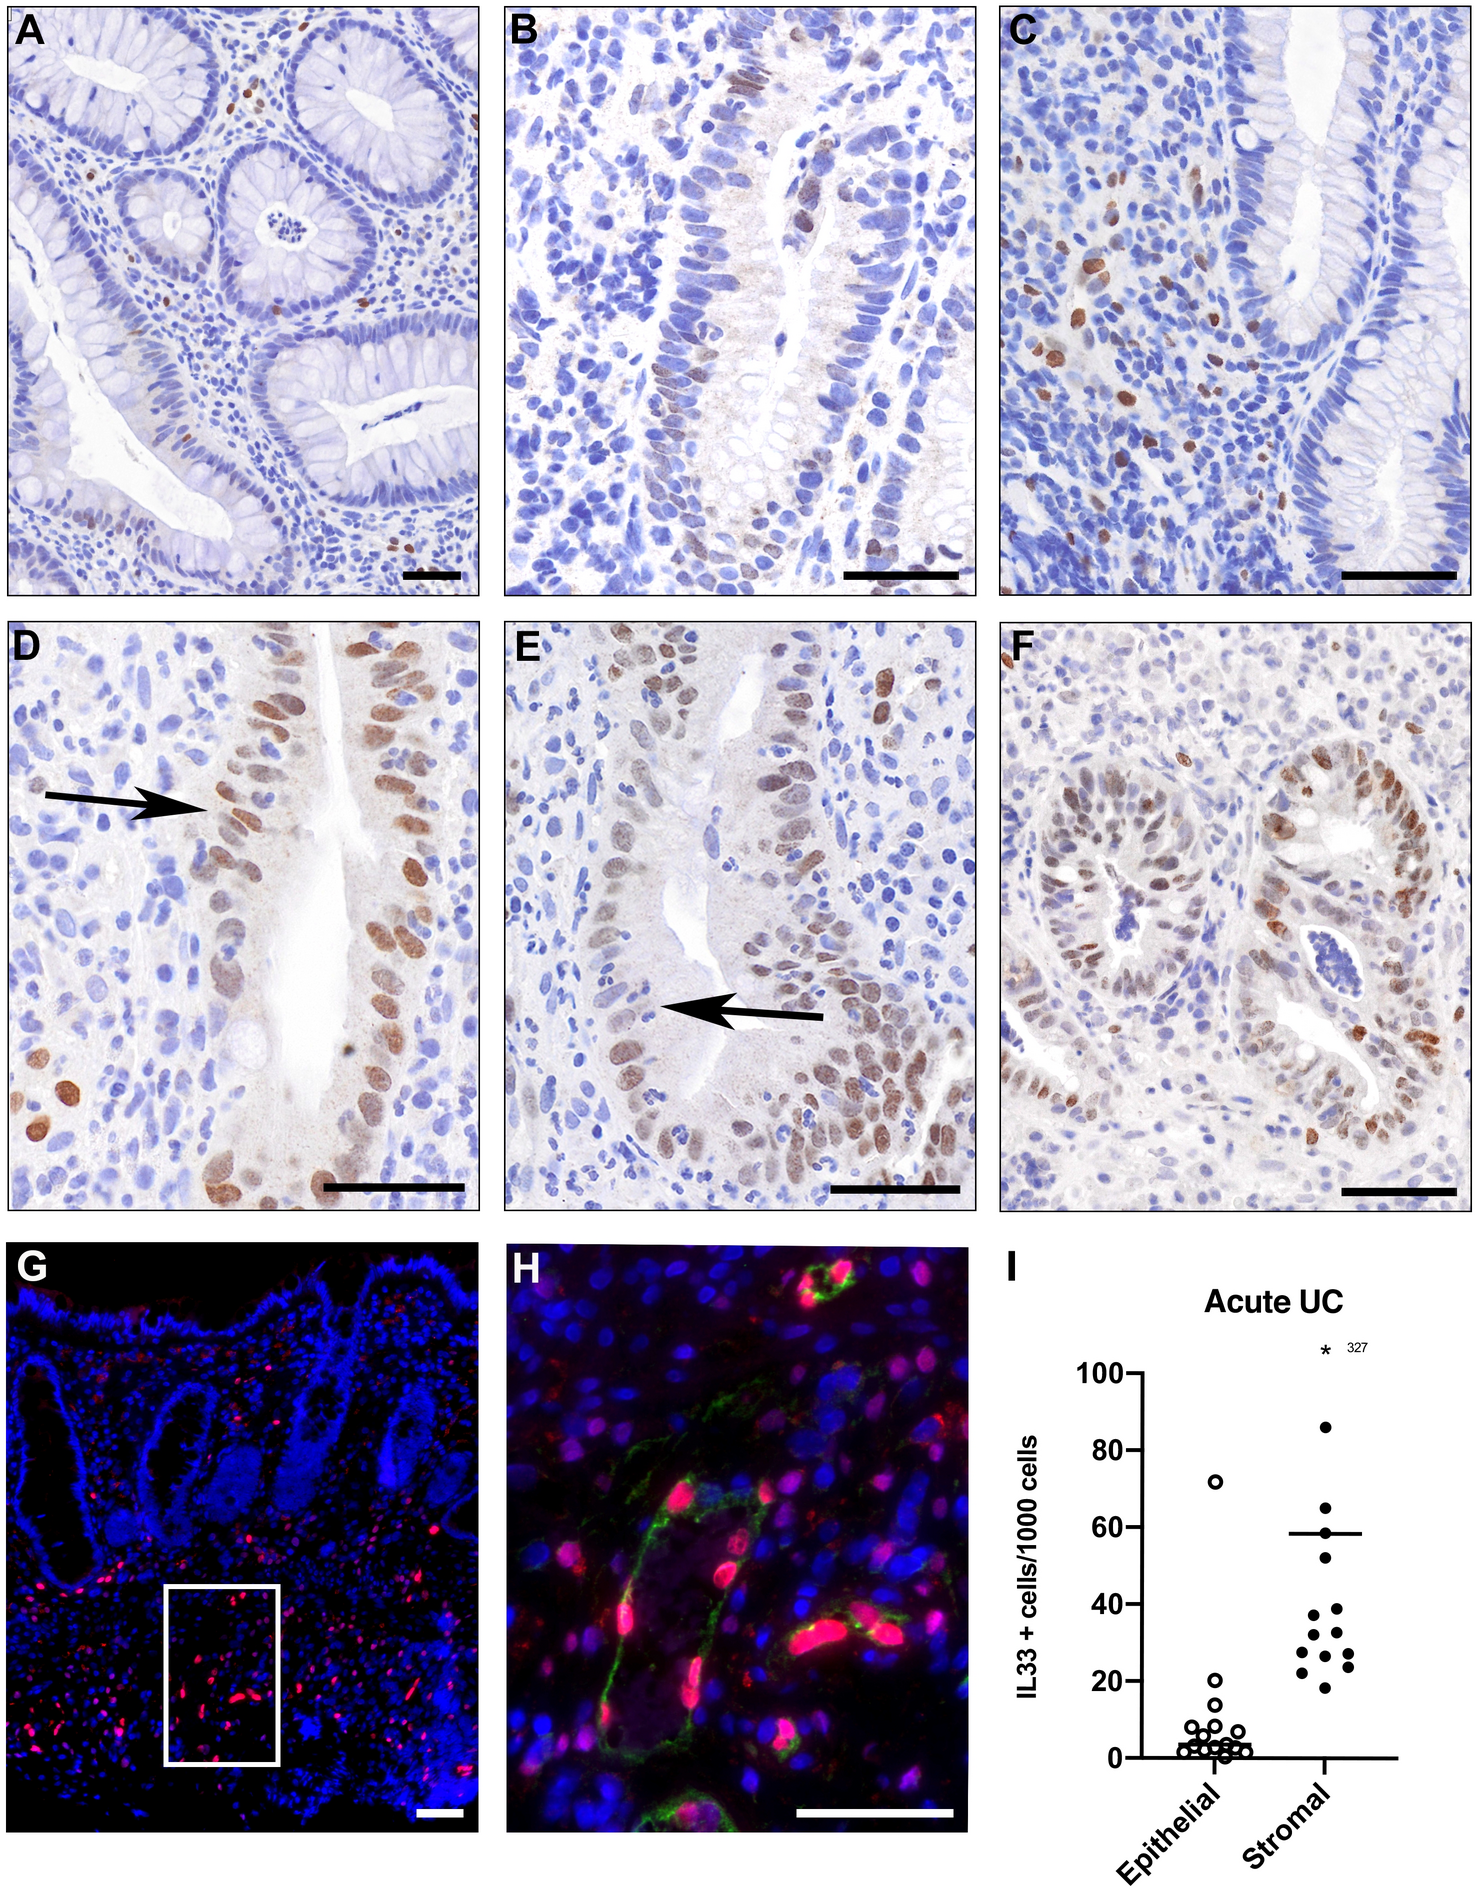 frihed Herske pin Hypo-osmotic stress induces the epithelial alarmin IL-33 in the colonic  barrier of ulcerative colitis | Scientific Reports